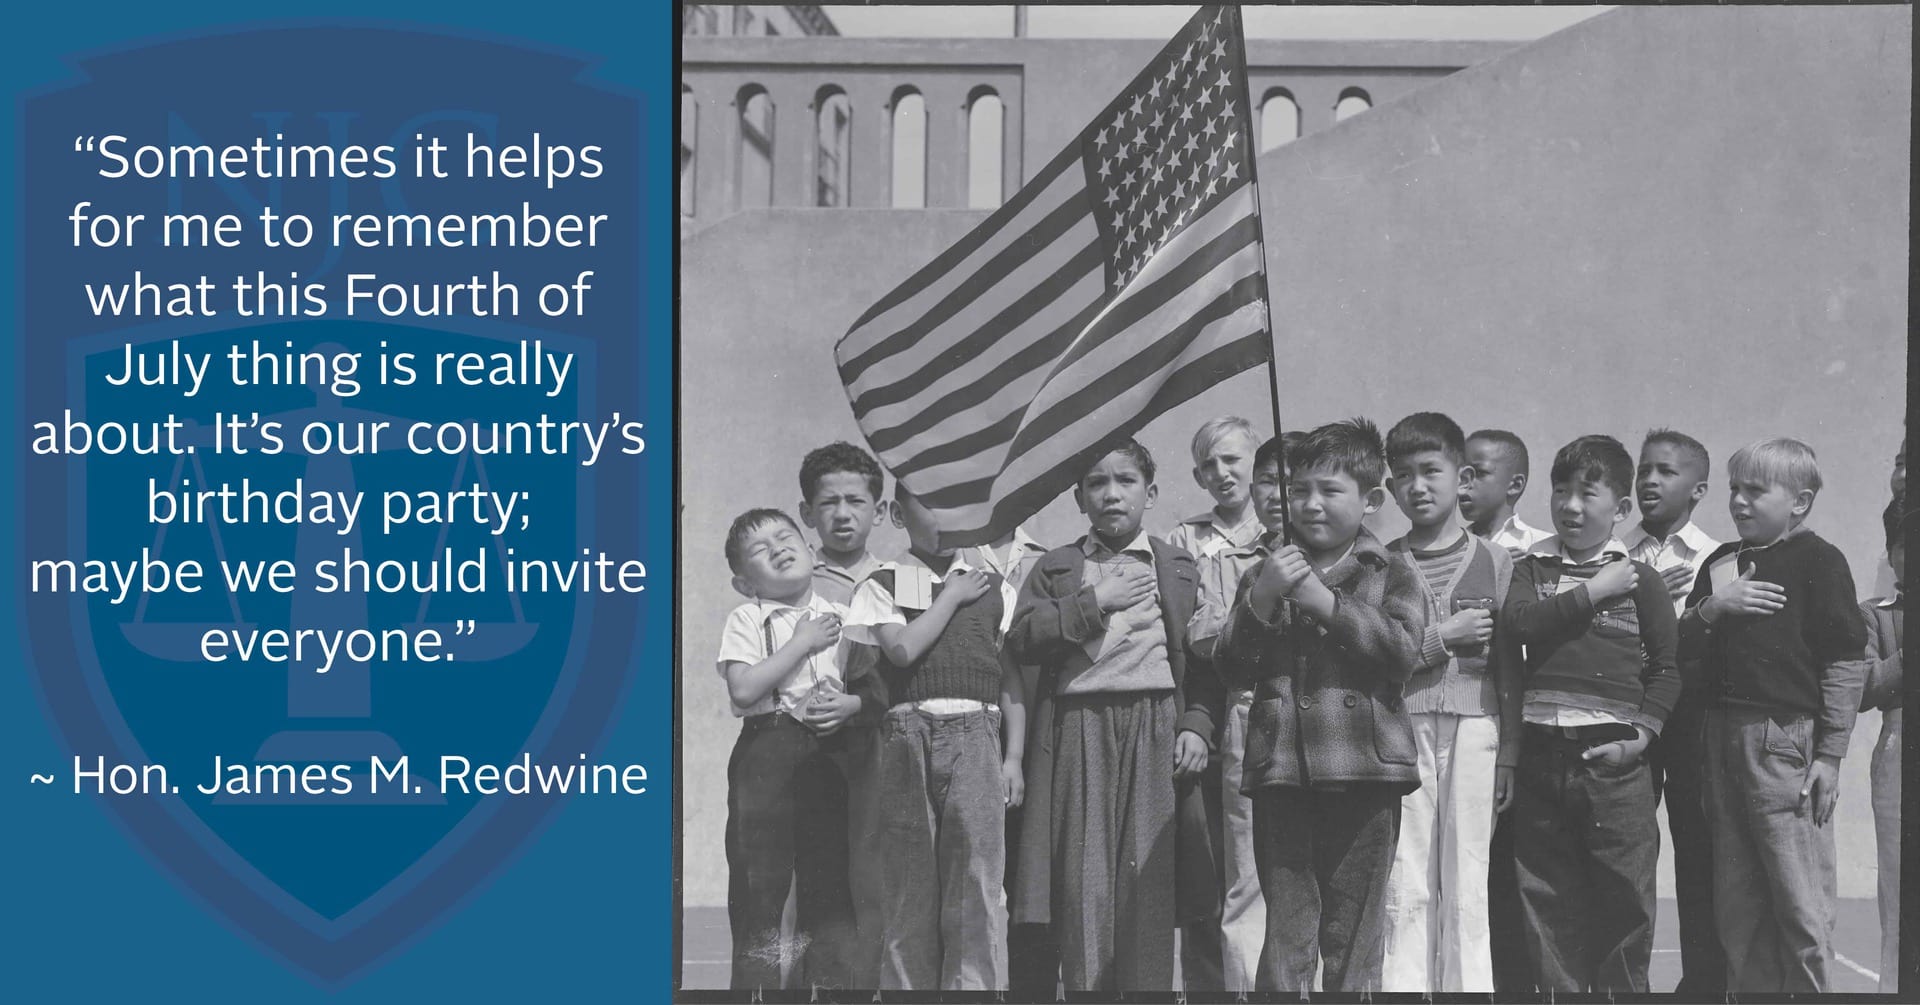 Honorable James M. Redwine on Fourth of July